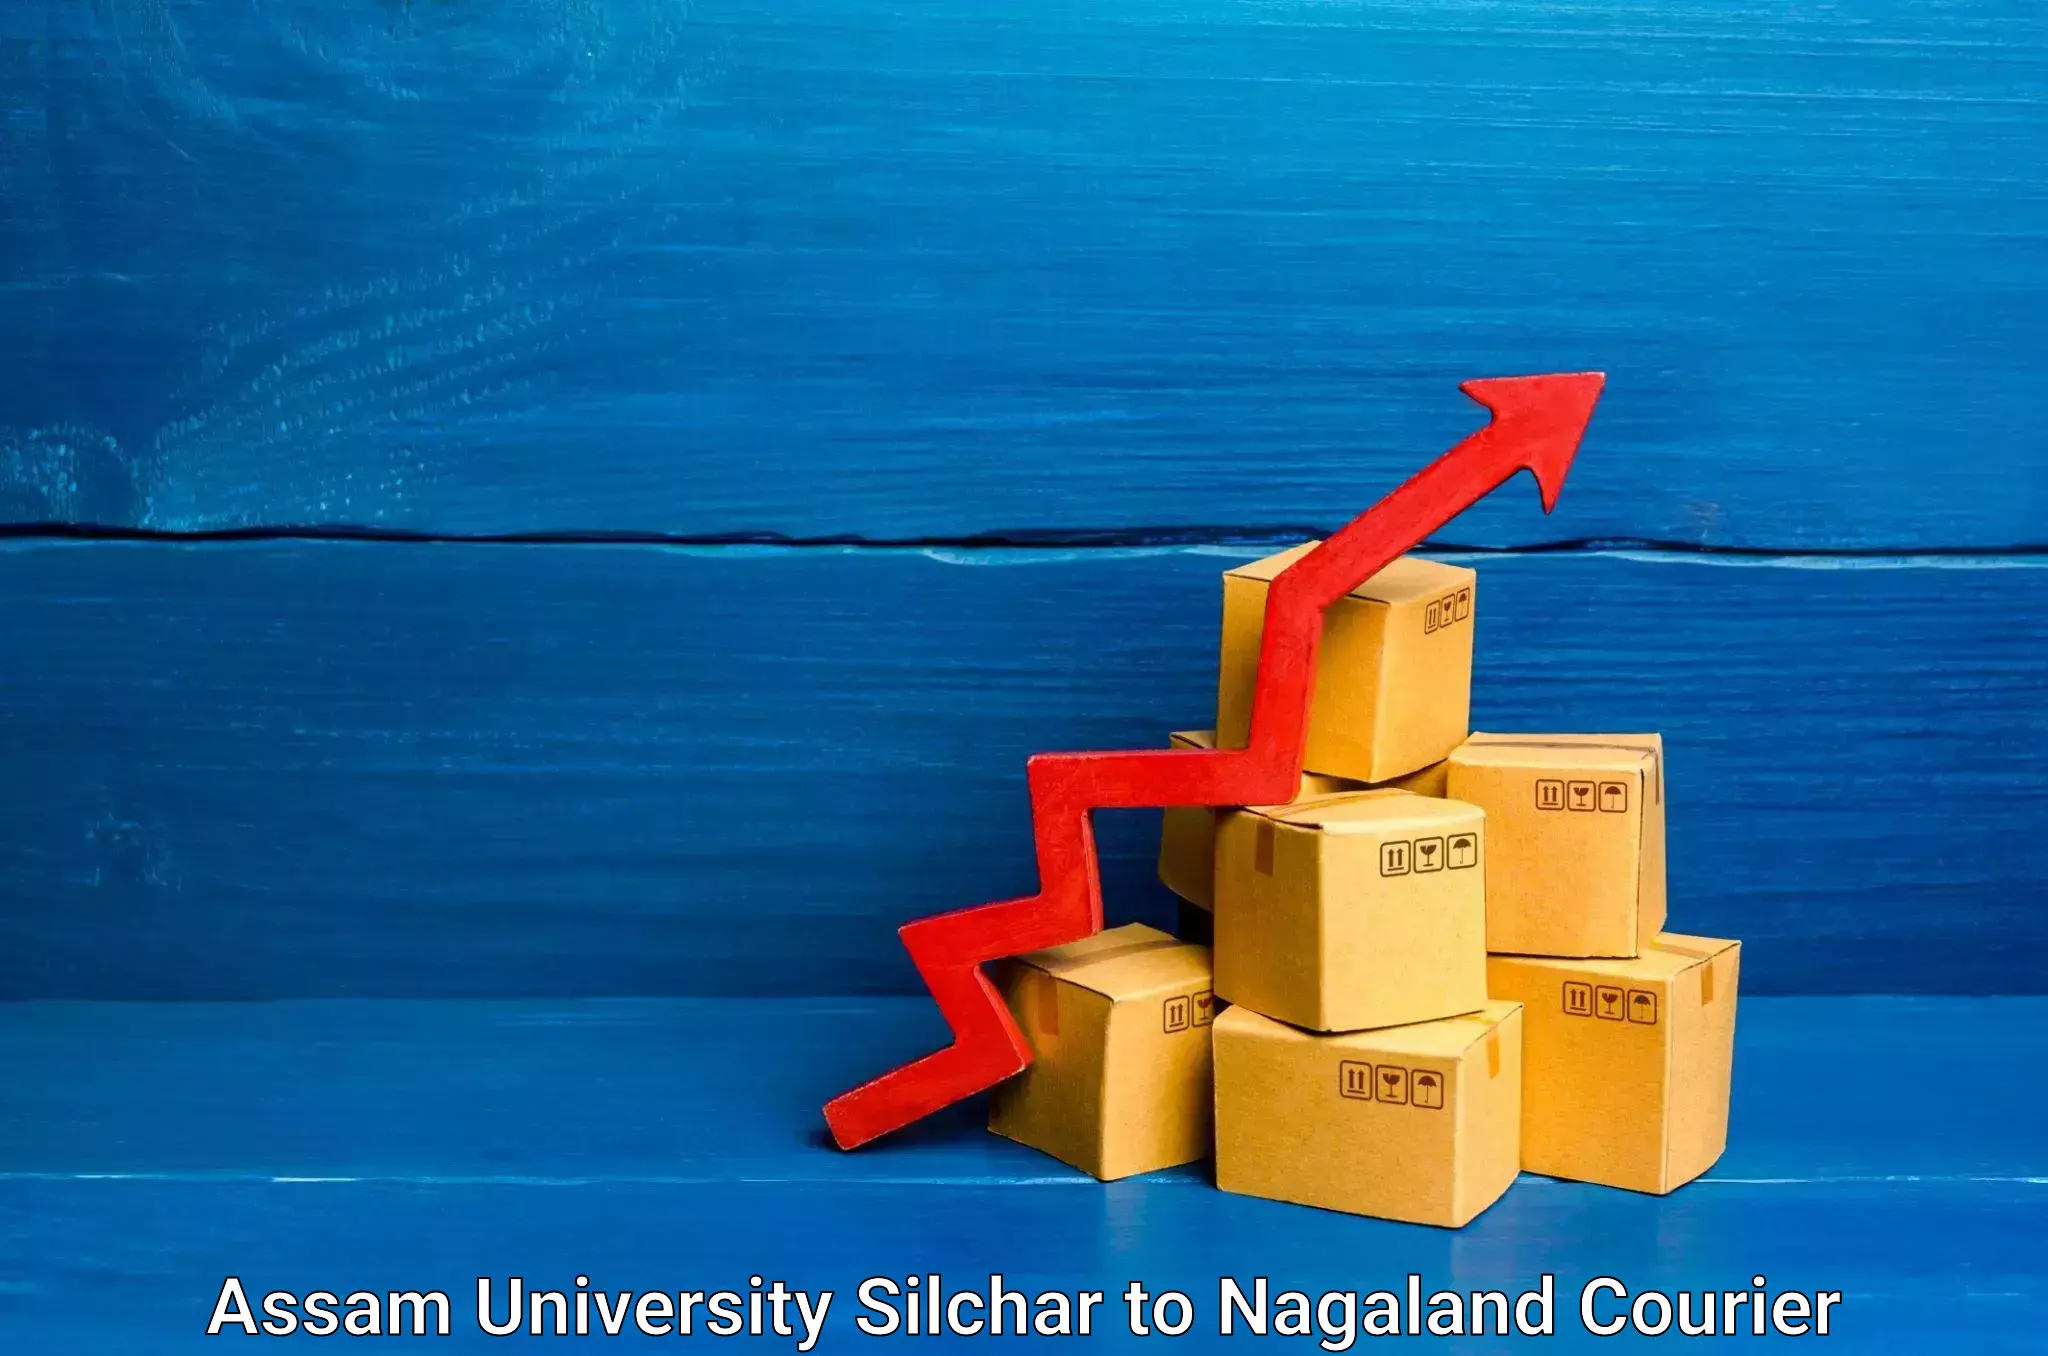 Reliable freight solutions Assam University Silchar to Nagaland